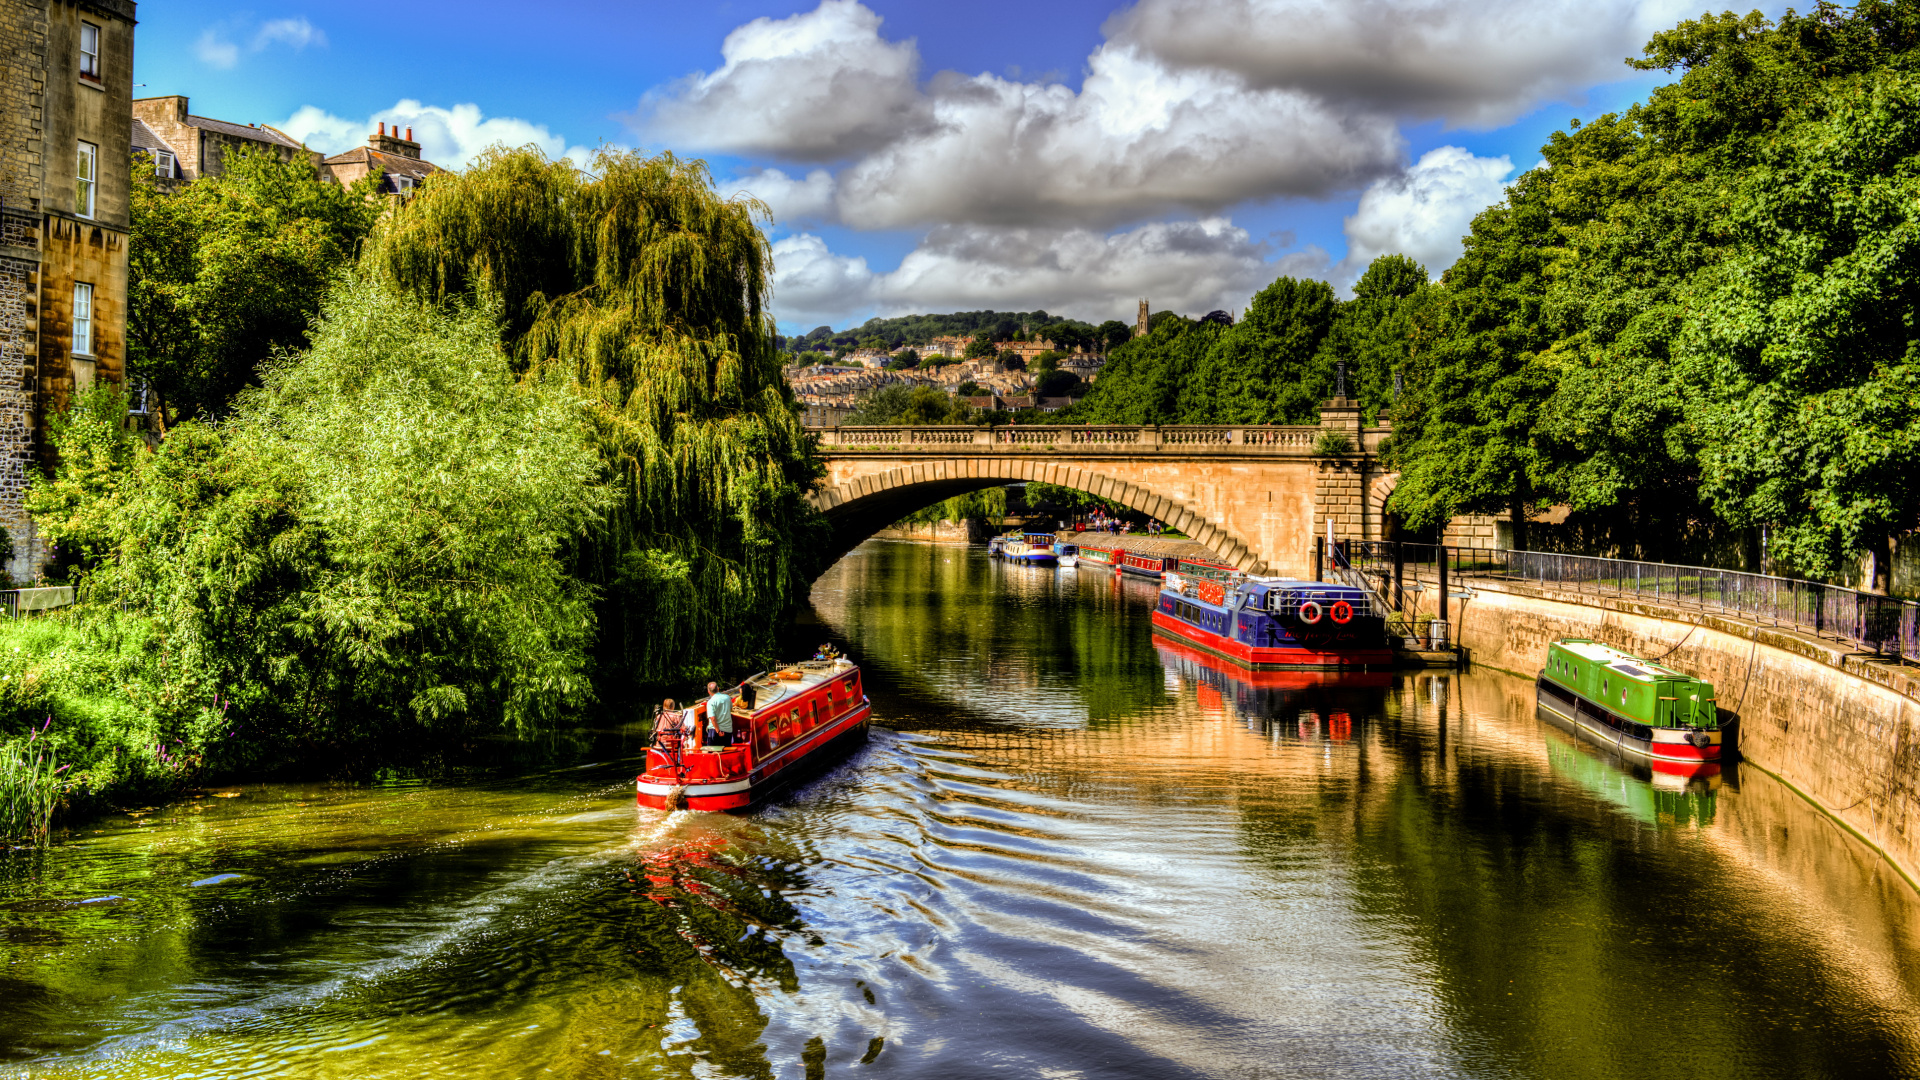 Red Boat on River Near Green Trees Under Blue Sky and White Clouds During Daytime. Wallpaper in 1920x1080 Resolution